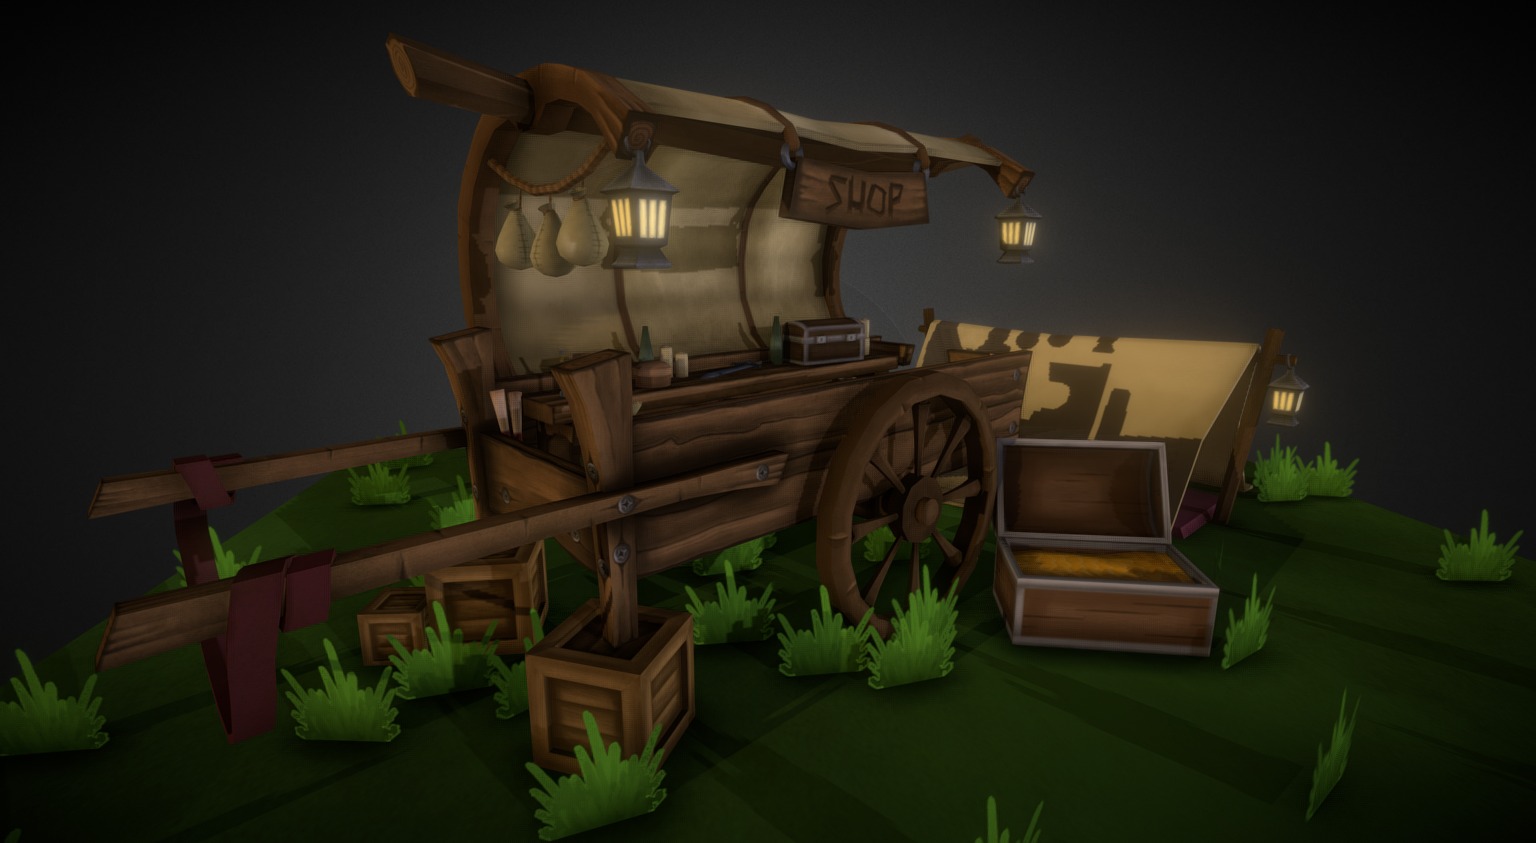 I'm a student currently studying the Btec Games Art course at Warwickshire college. This model of a small camp, containing a wooden trading cart, a tent and a chest Is my first piece for my portfolio based off the concept art by PeetCooper - Traveling Merchant Cart - 3D model by Gran (@lividgrain) 3d model